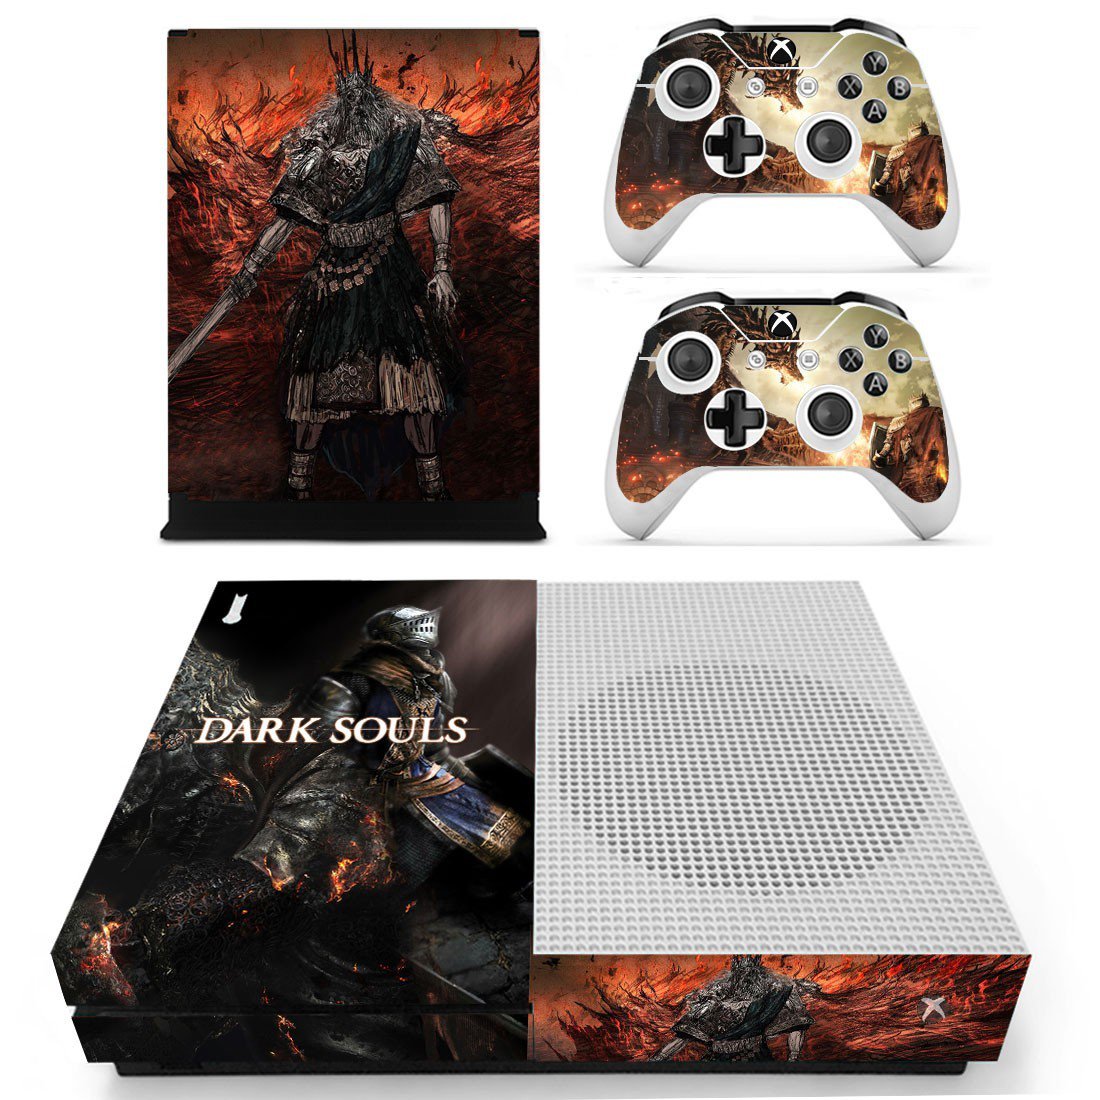 Dark Souls Sticker For Xbox One S And Controllers